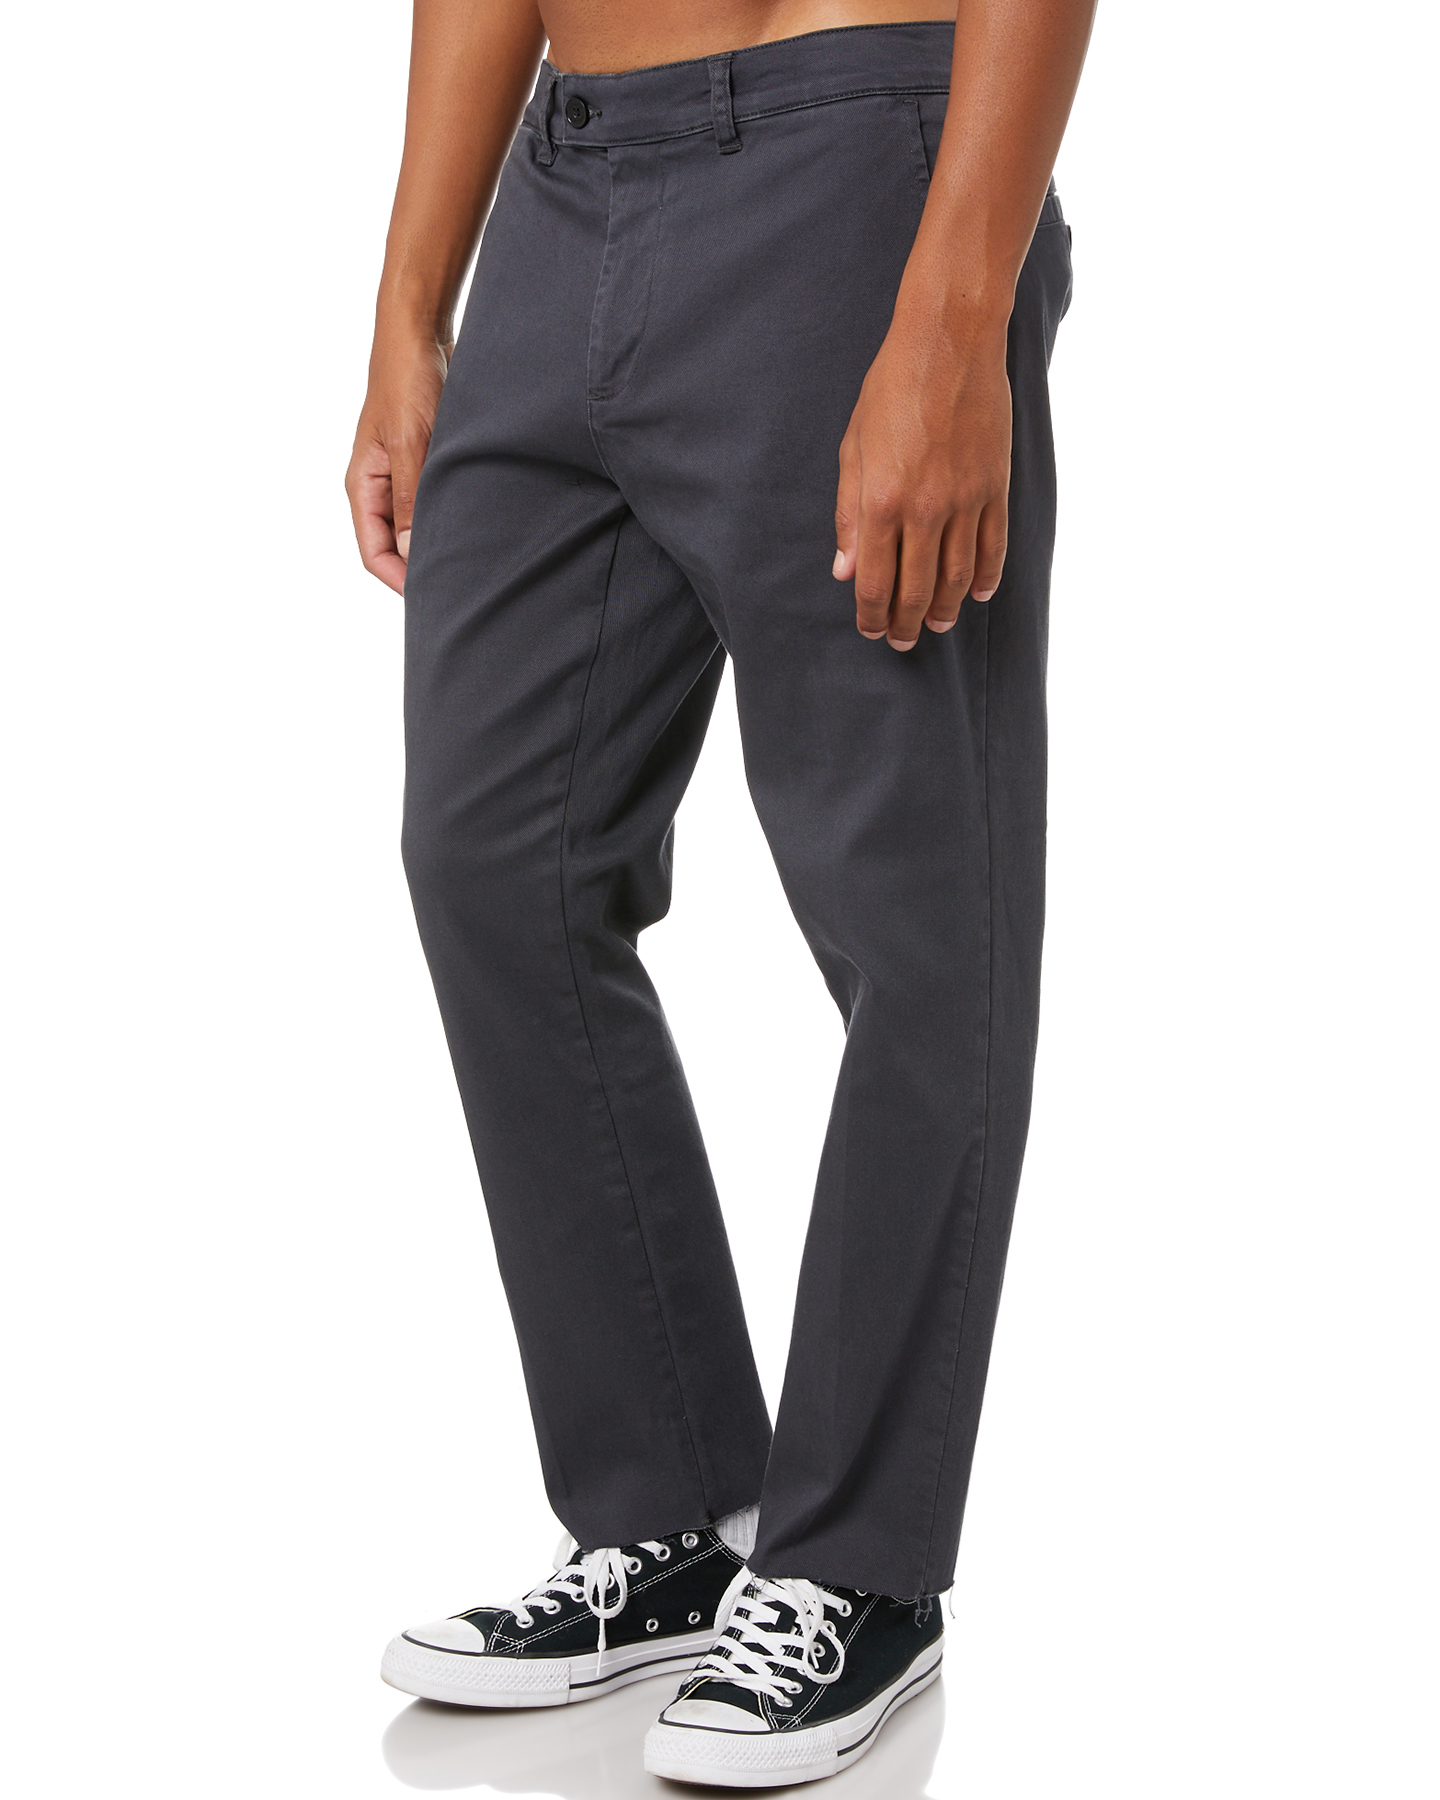 Rollas Relaxo Chop Mens Pants - V8 Ink Drill | SurfStitch